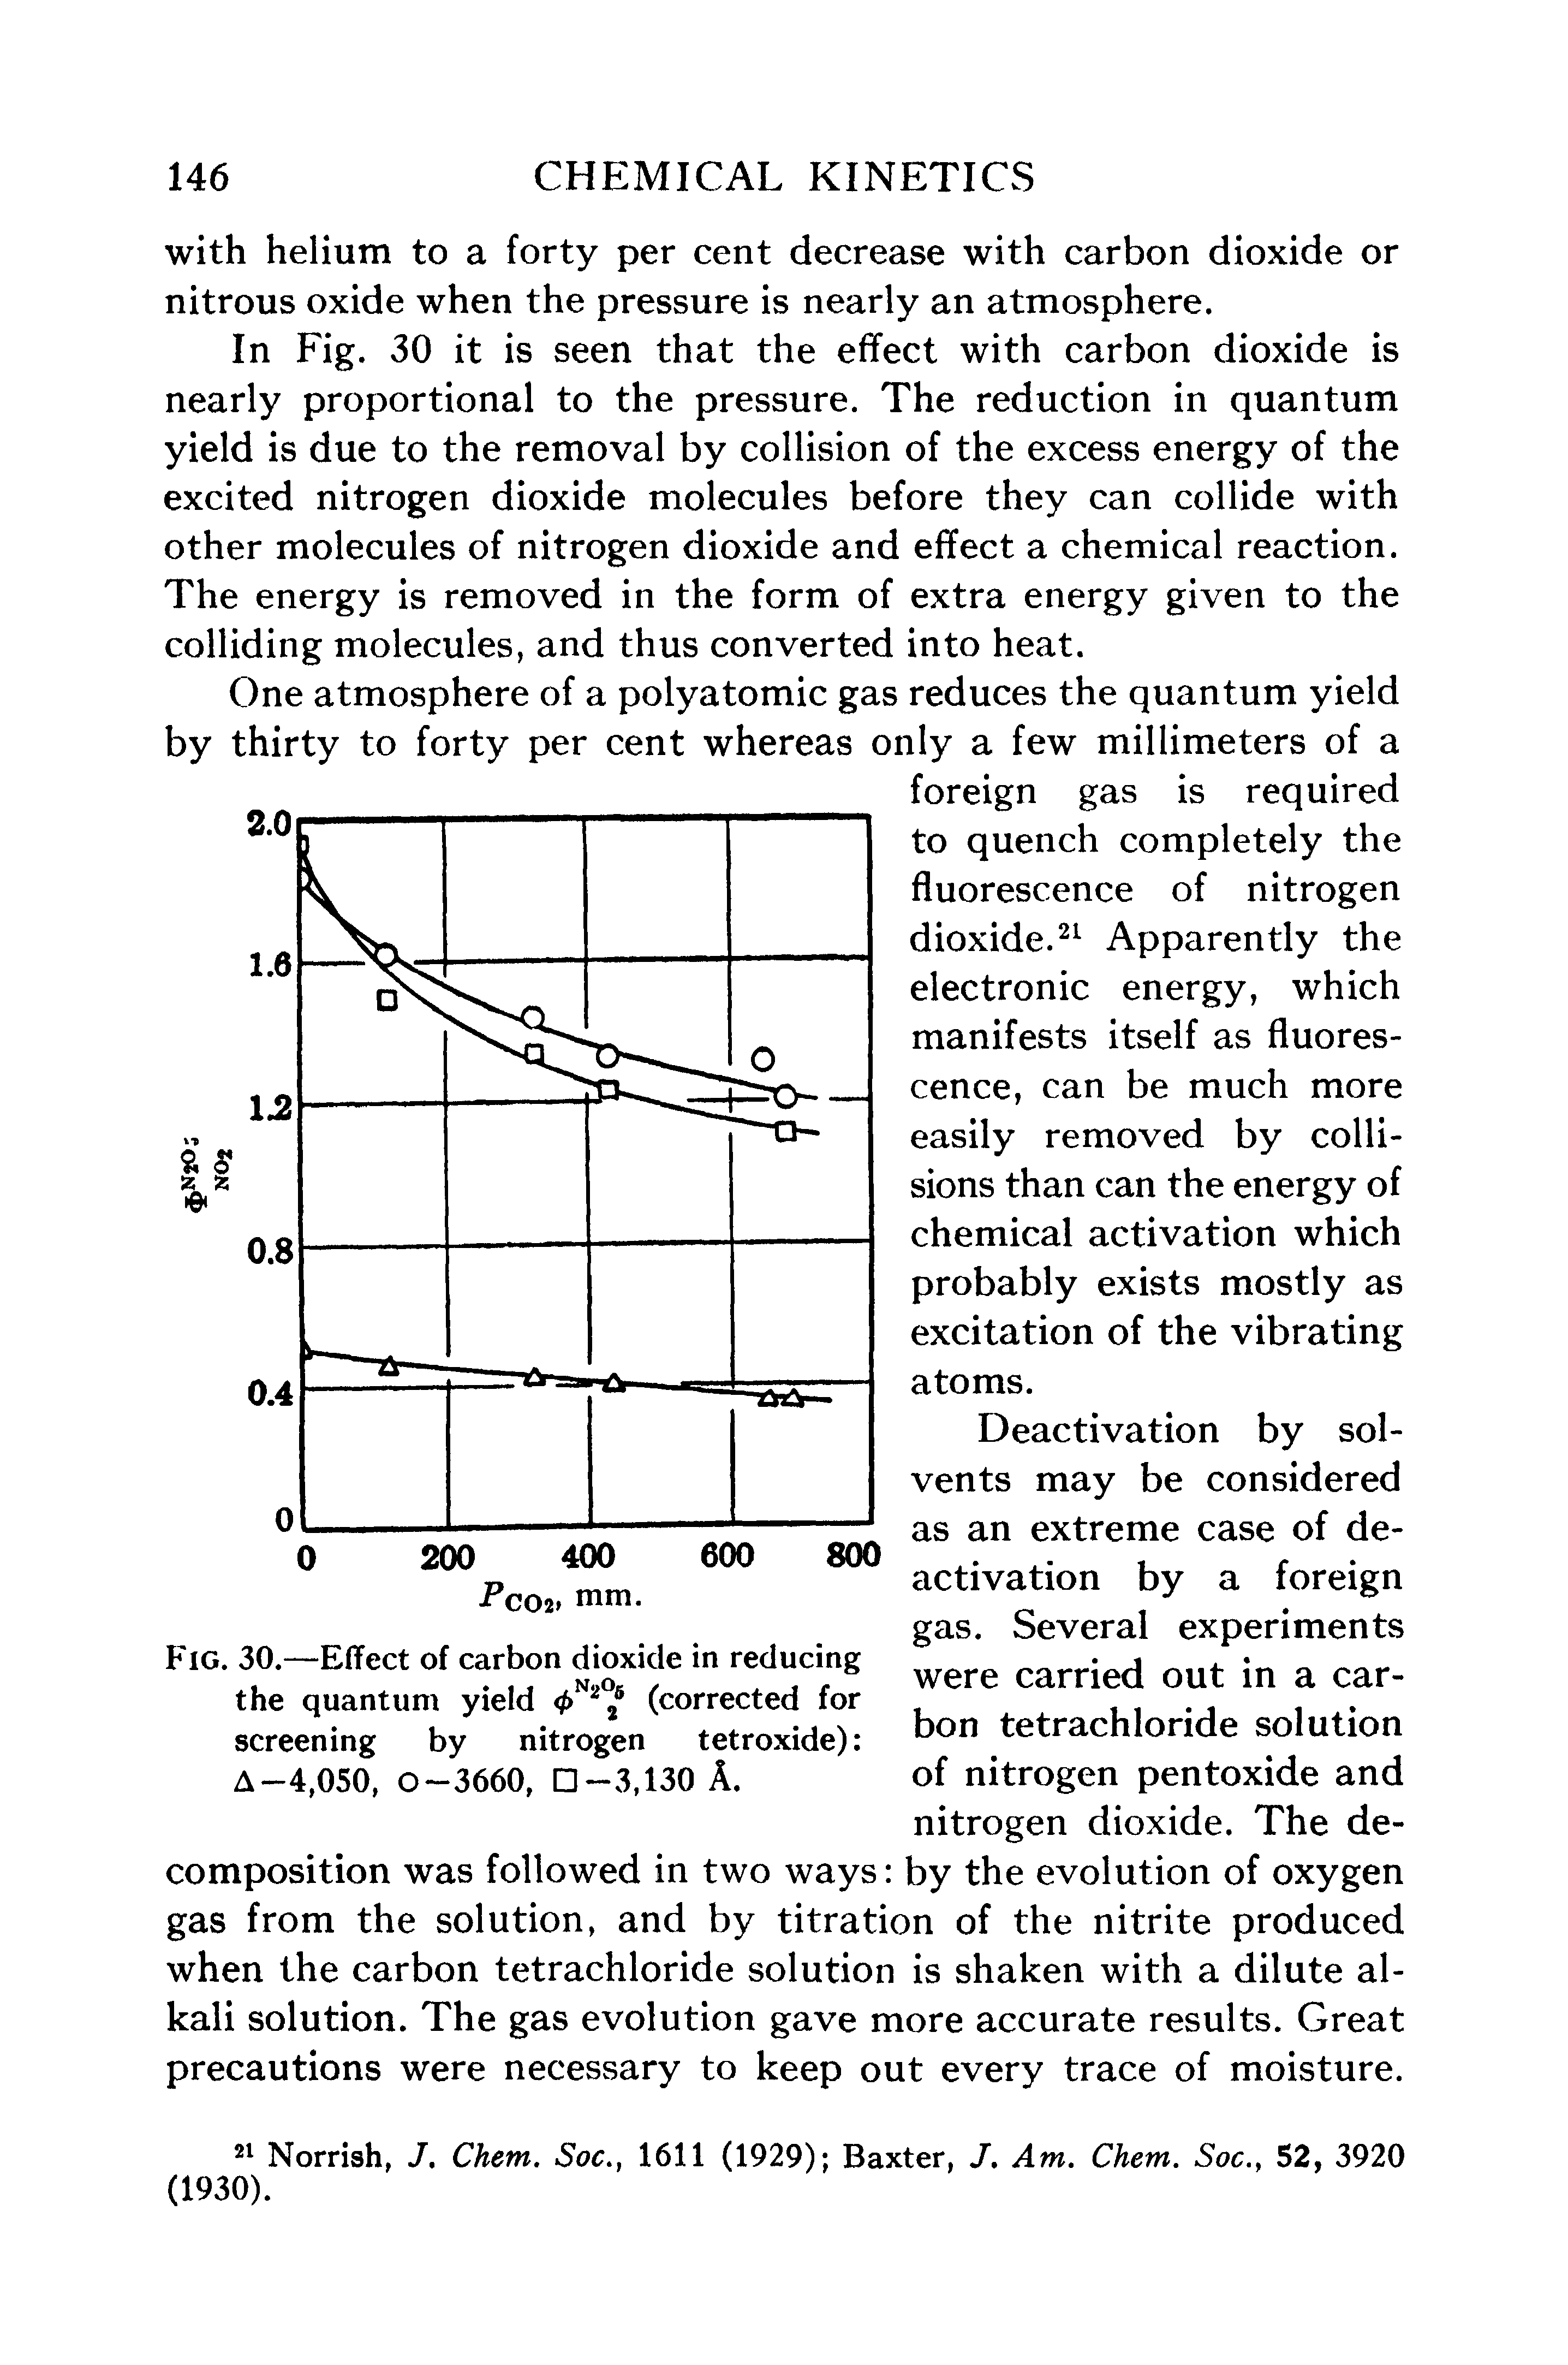 Fig. 30.—Effect of carbon dioxide in reducing the quantum yield < N2°6 (corrected for screening by nitrogen tetroxide) A—4,050, O—3660, 0-3,130 A.